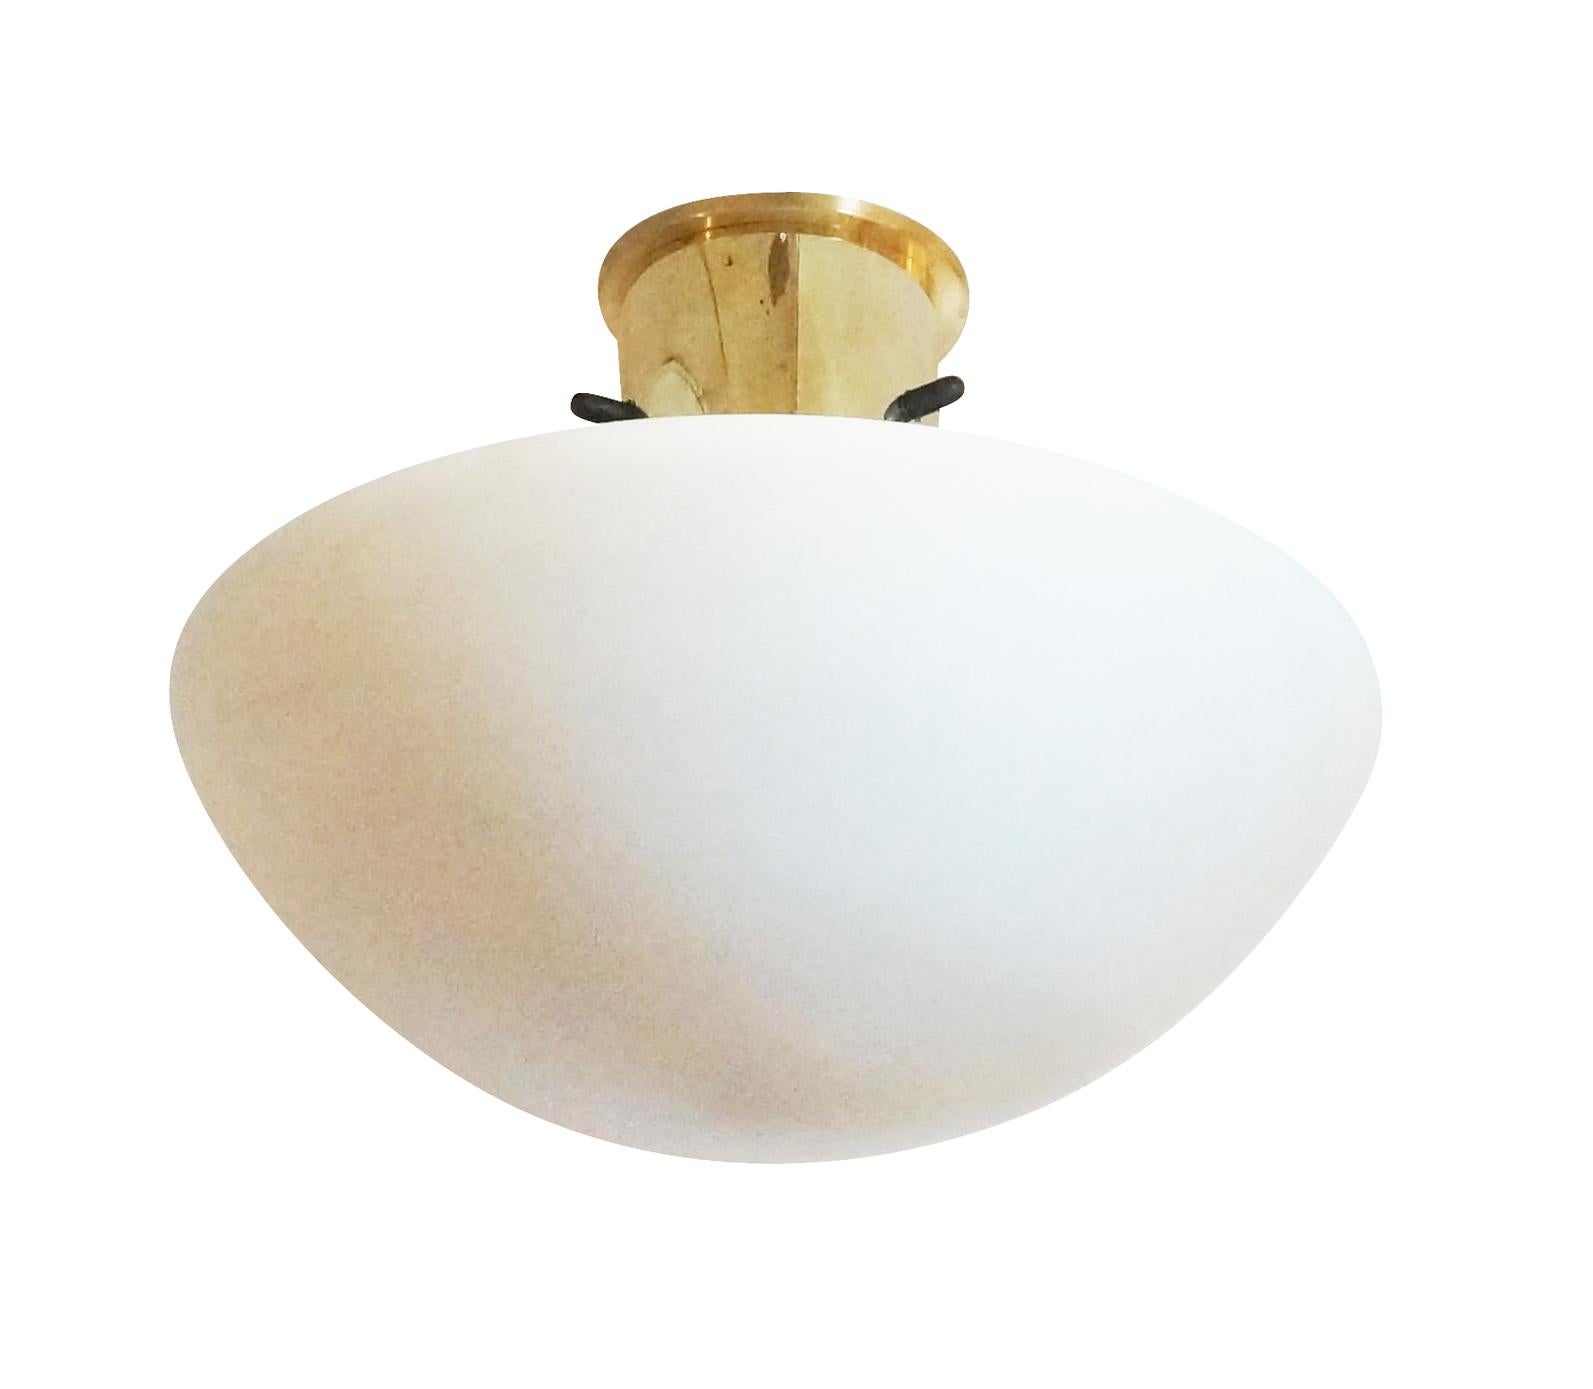 Italian Mid-Century flush mounts with a large frosted glass diffuser and brass hardware. Holds one light source. Two available-price per light. 

Condition: Excellent vintage condition, minor wear consistent with age and use.

Diameter: 15”

Height: